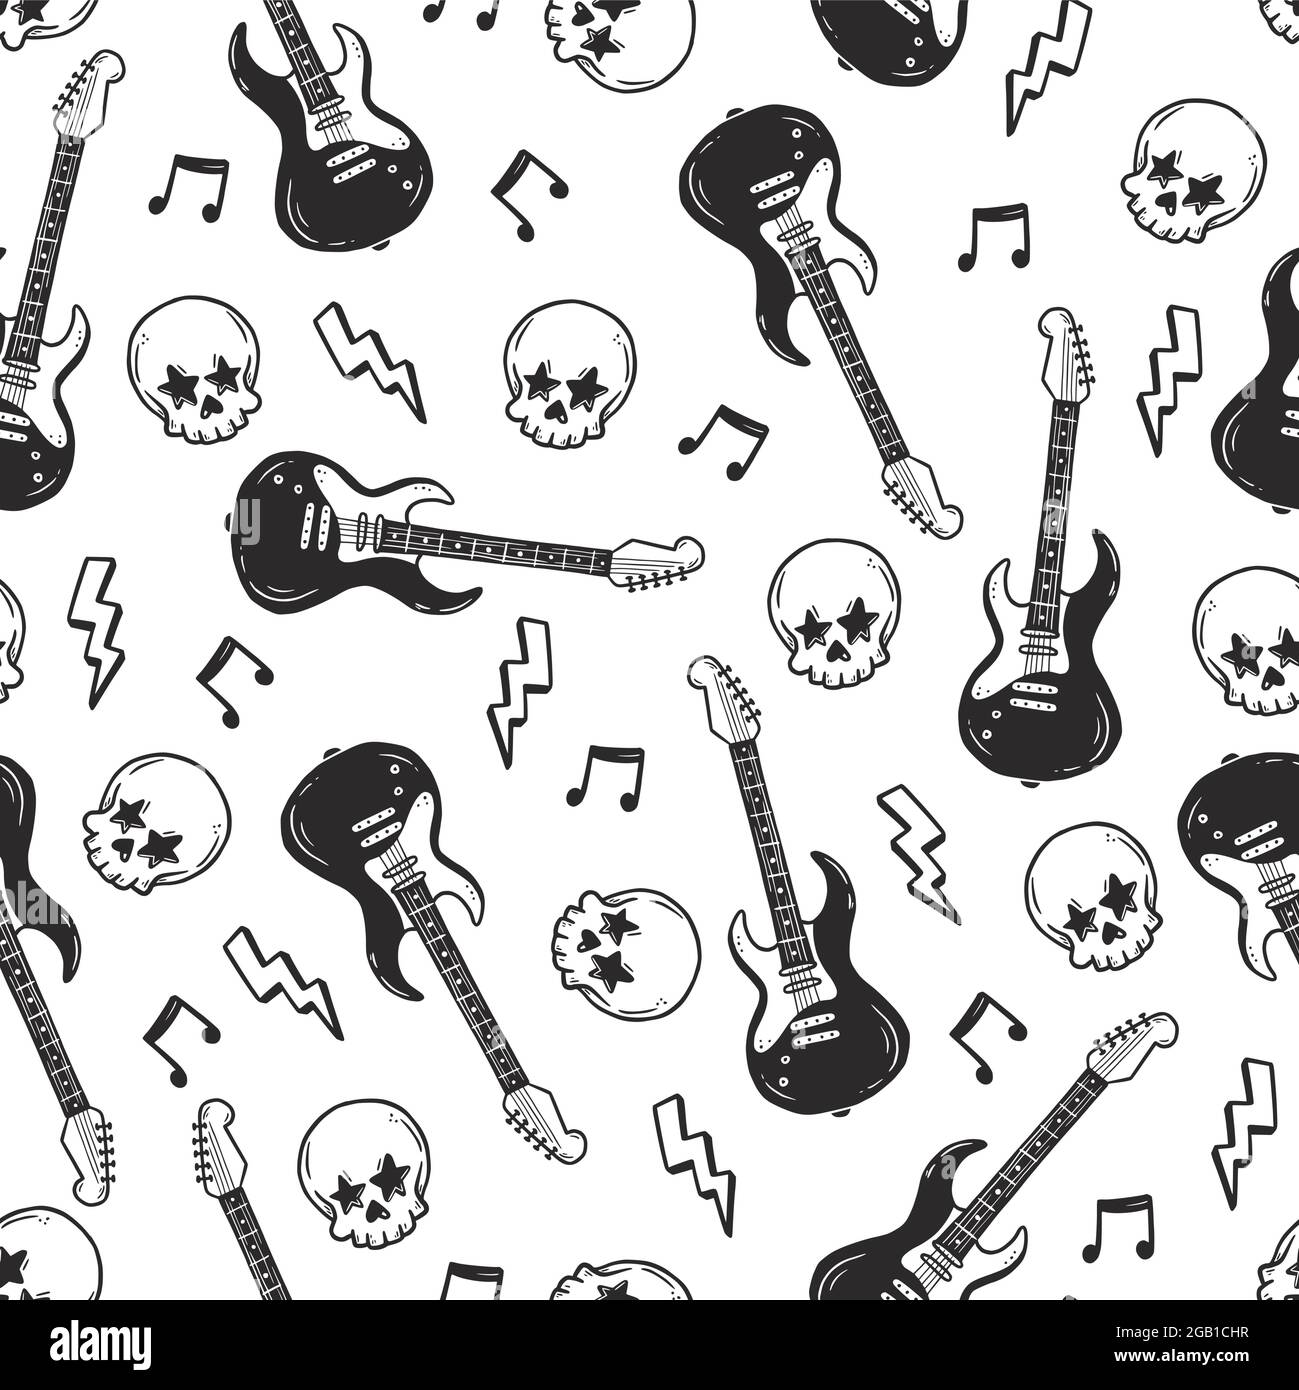 Music note graffiti Stock Vector Images - Alamy